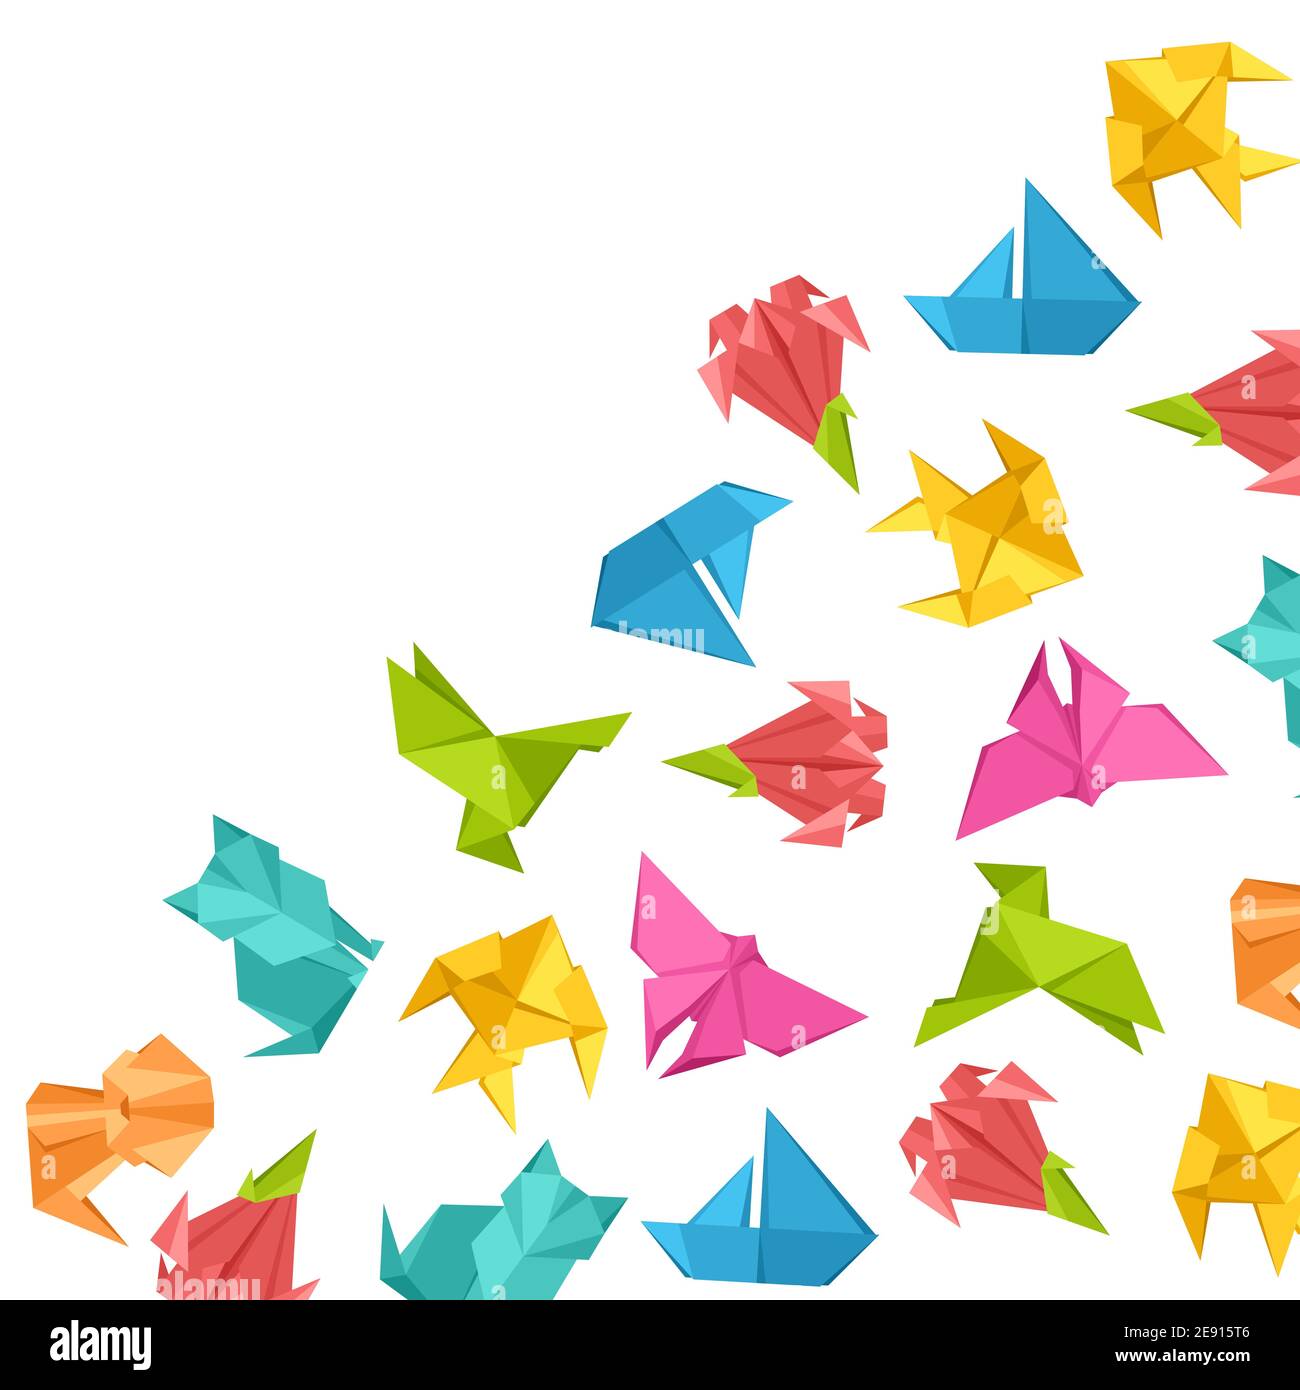 Background with origami toys. Stock Vector